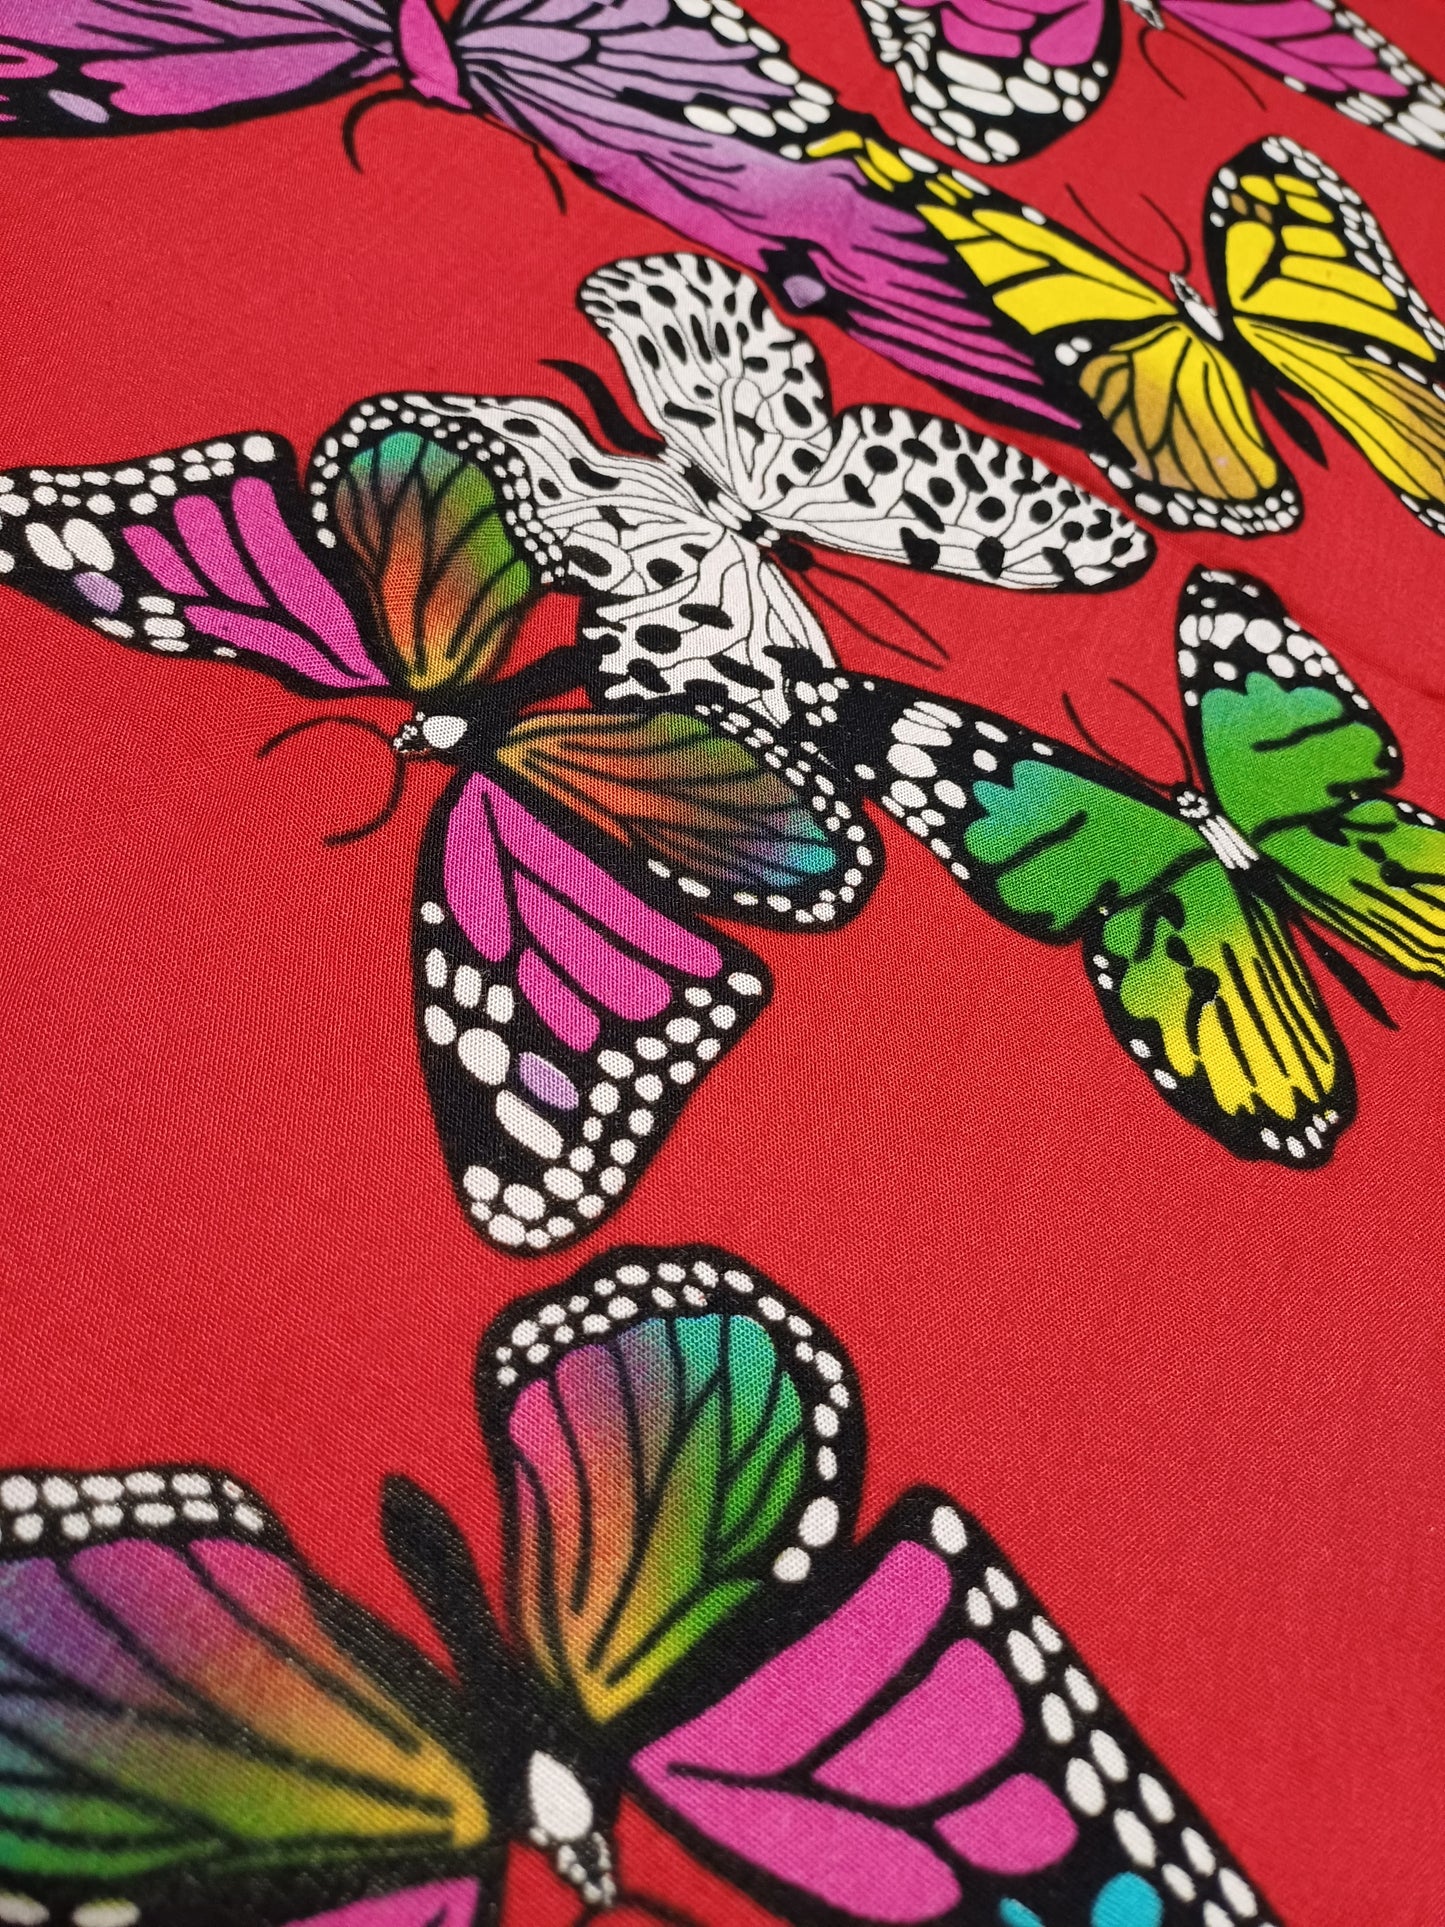 Pareo /sarong/butterfly